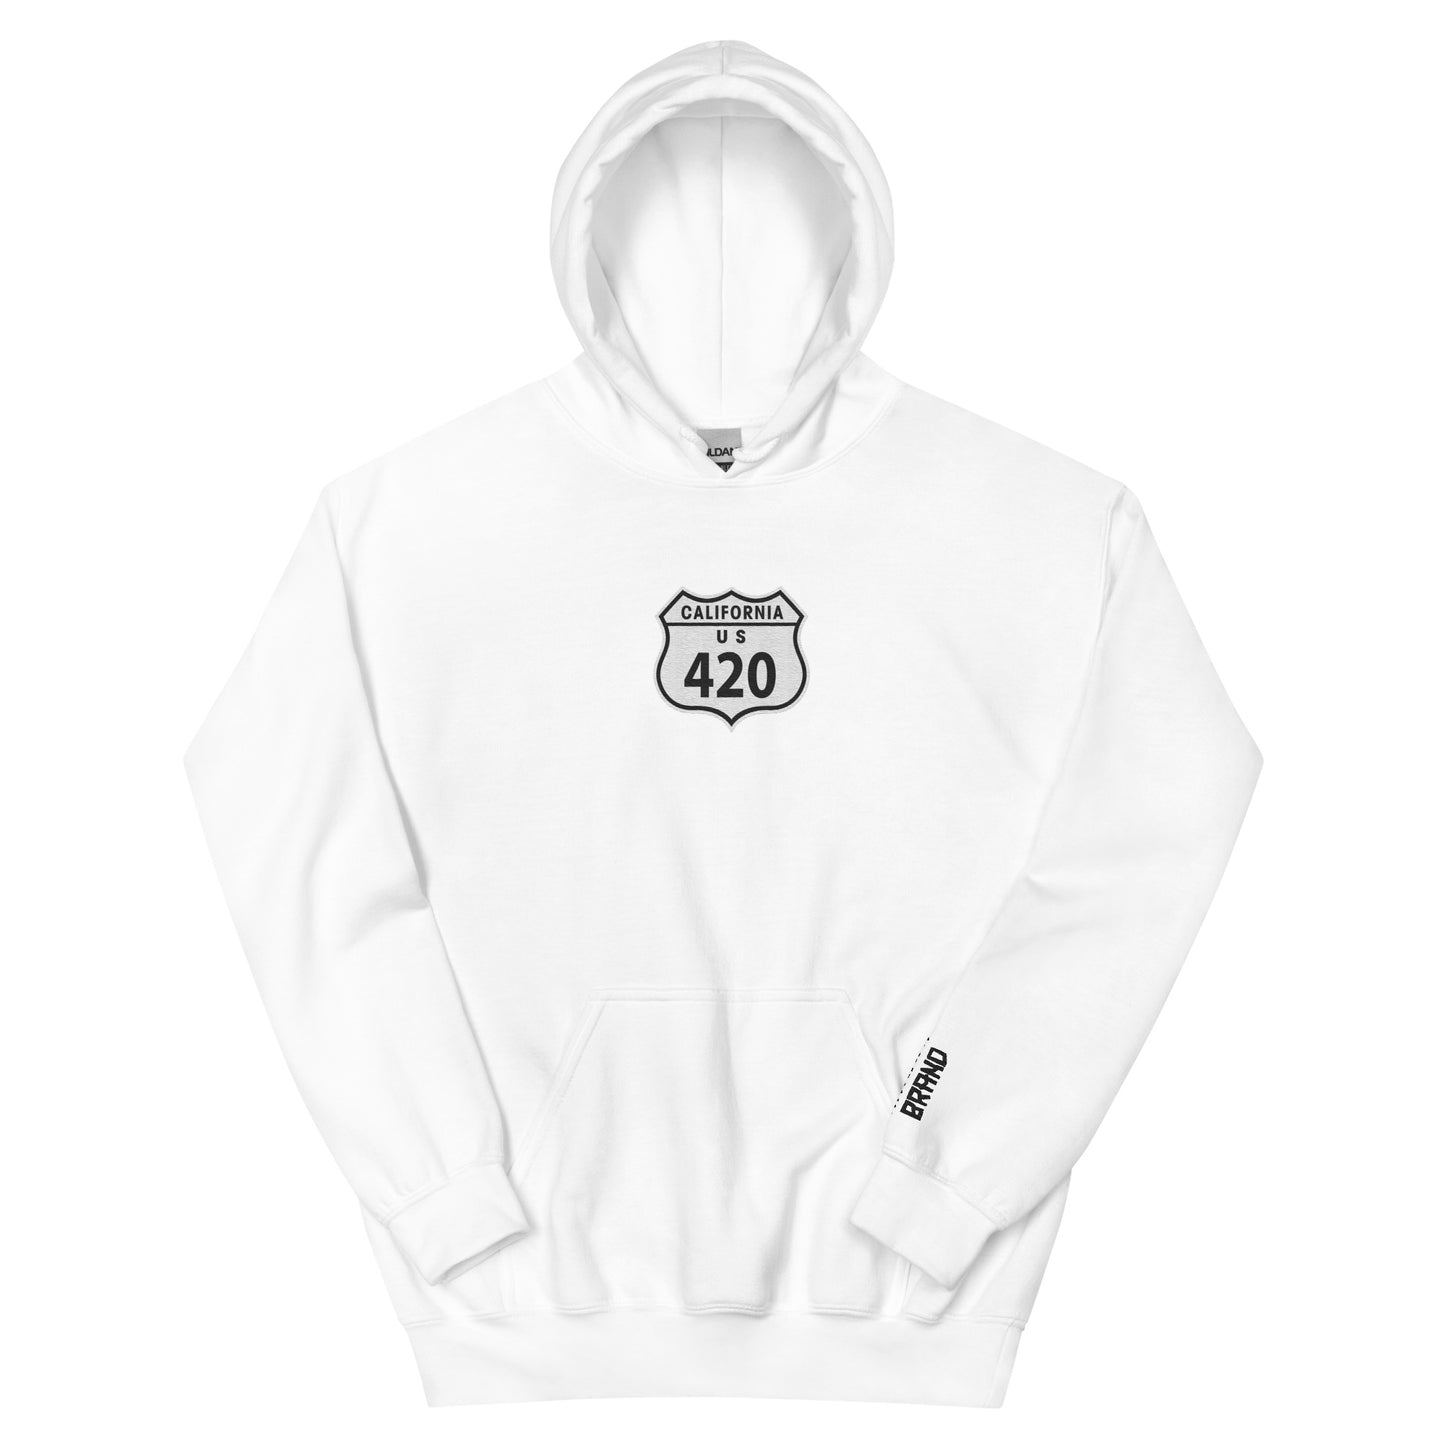 Kranik Brand Hoodie / 420 Collection / Embroidered / US 420